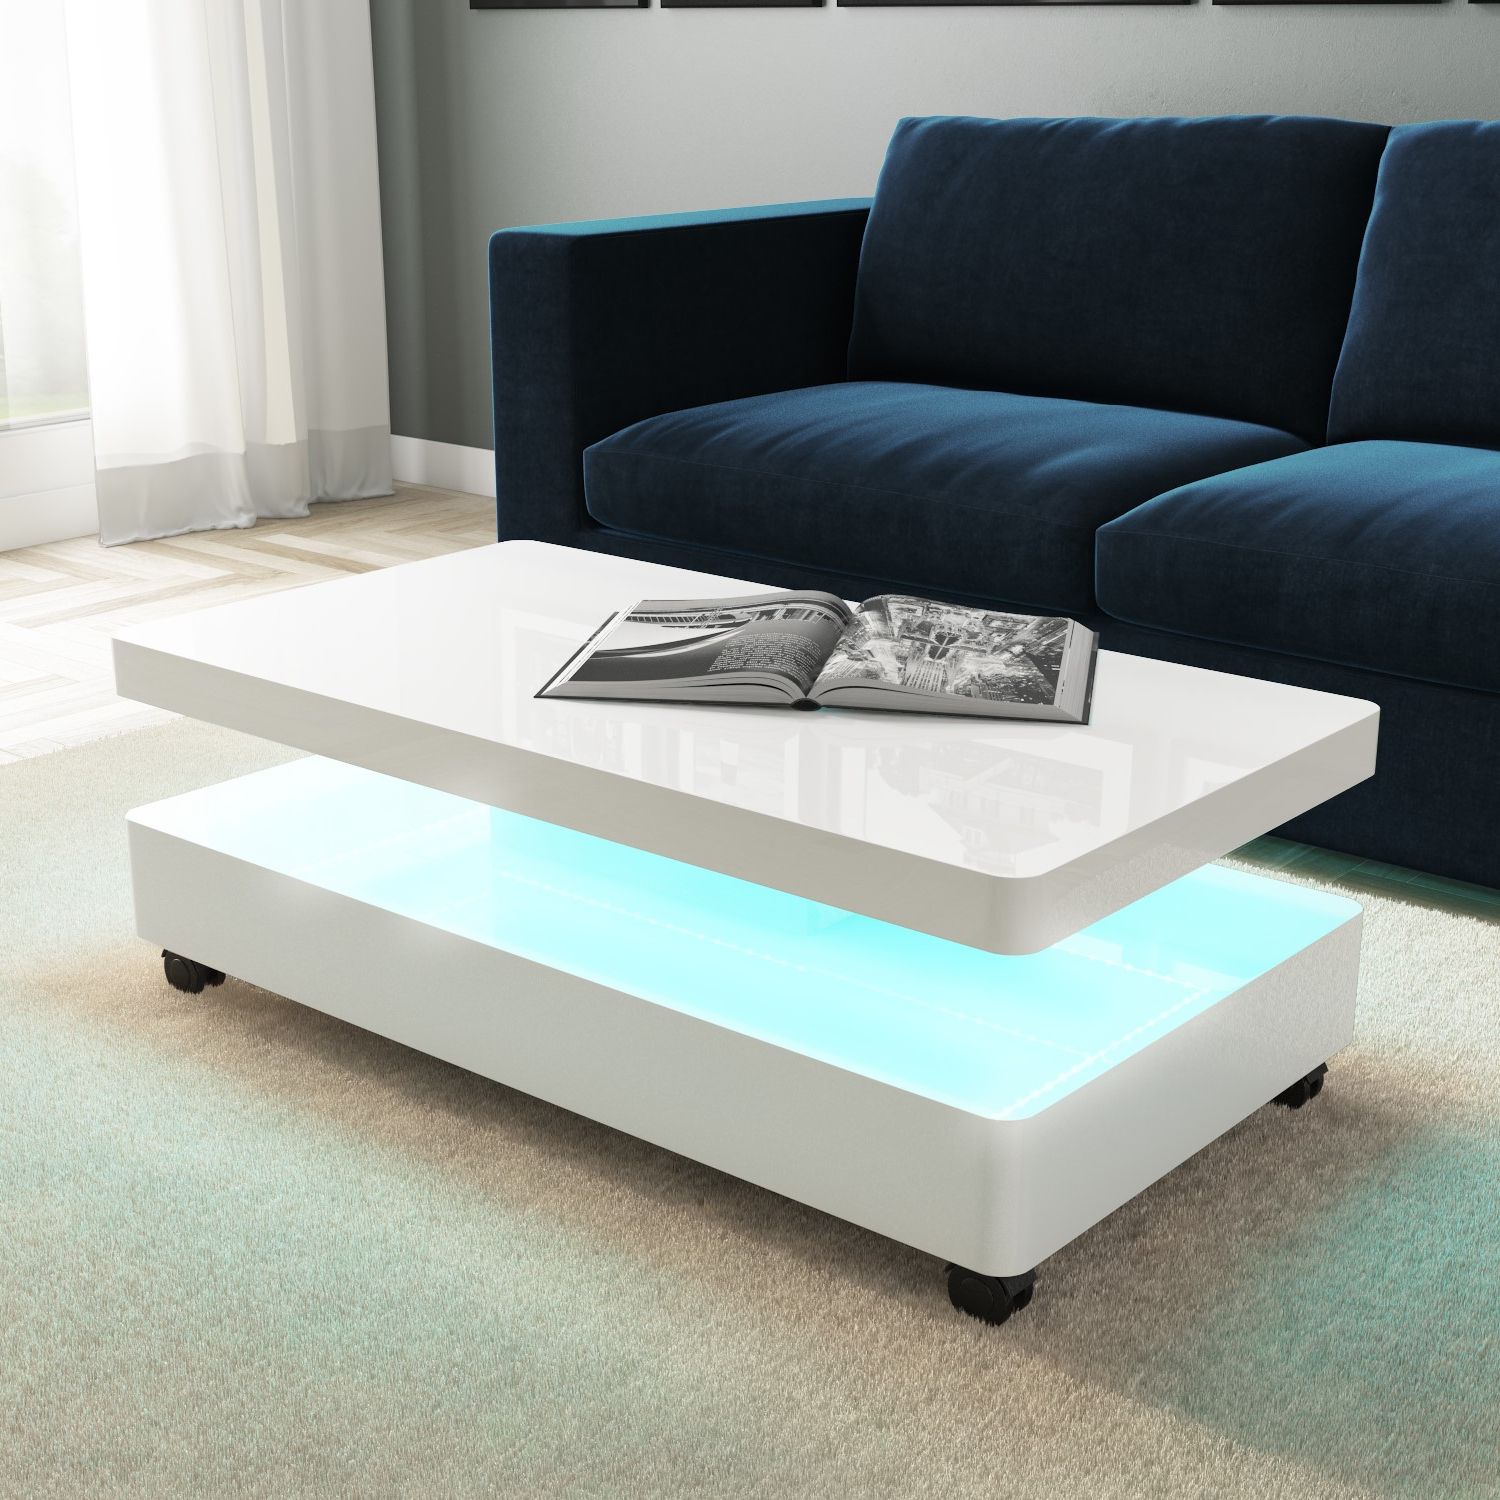 High Gloss White Coffee Table With Led Lighting 5060388562168 | Ebay Regarding Coffee Tables With Led Lights (View 7 of 20)